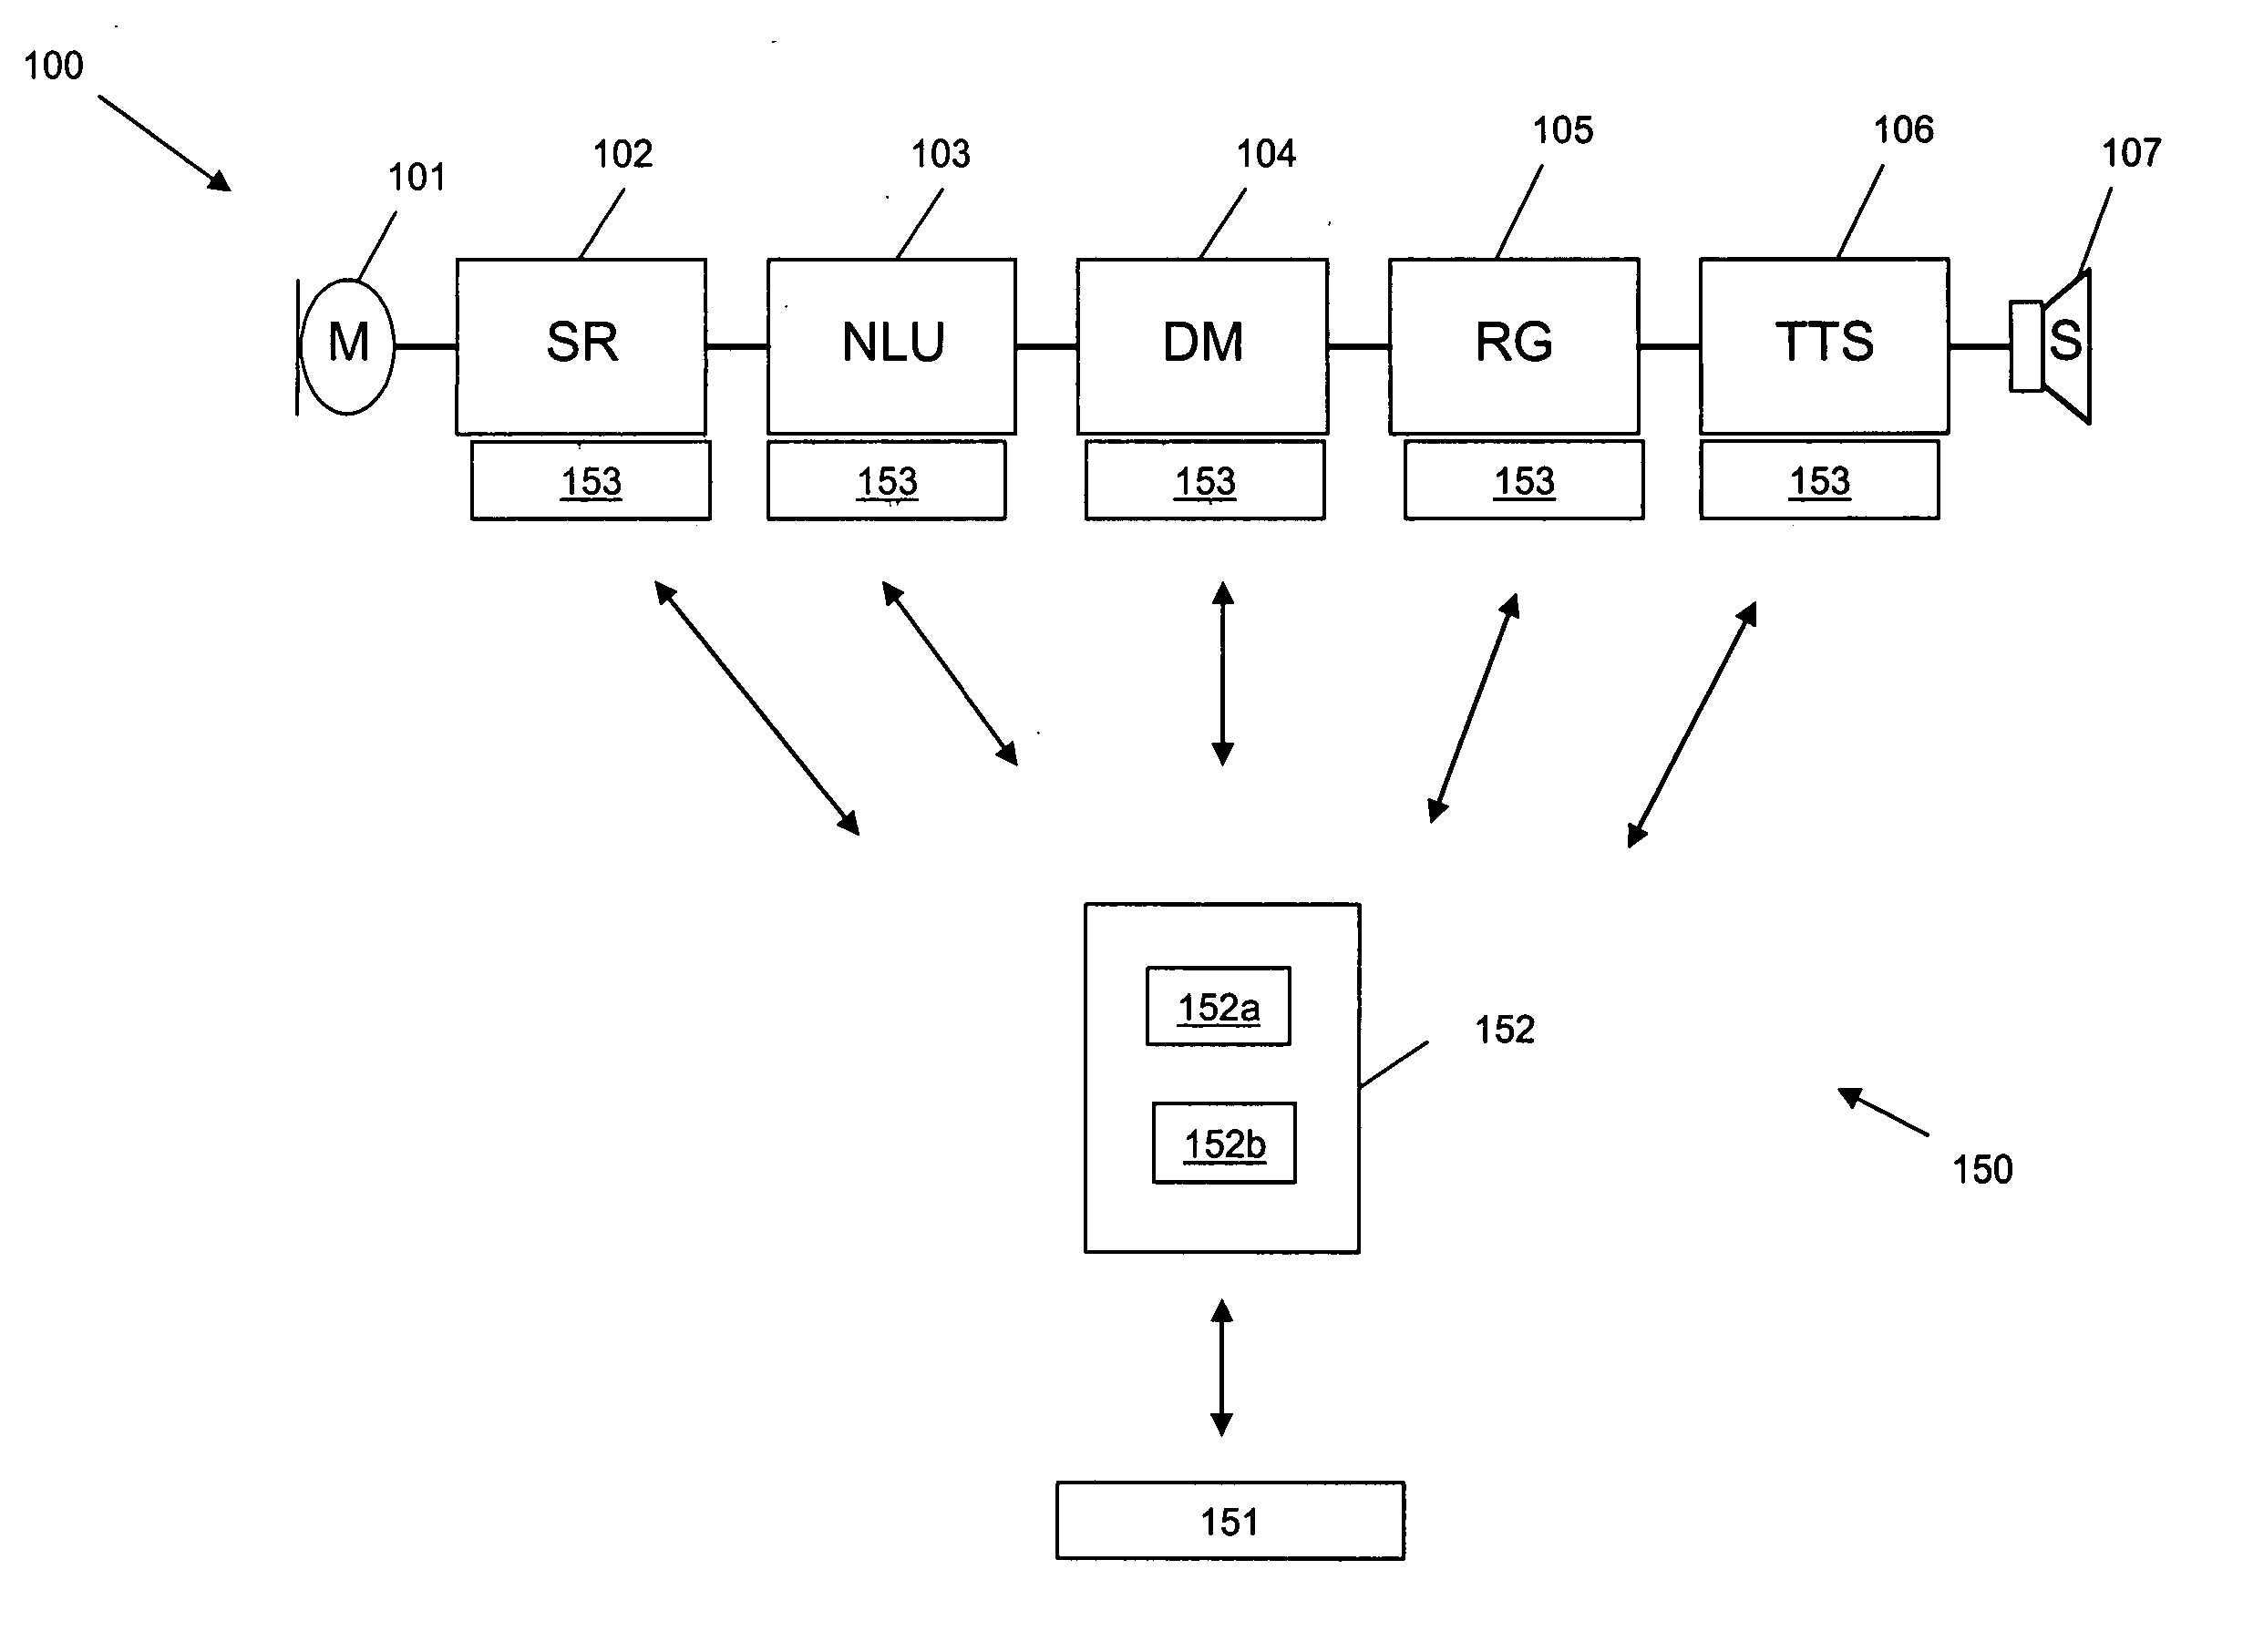 Method and system to parameterize dialog systems for the purpose of branding